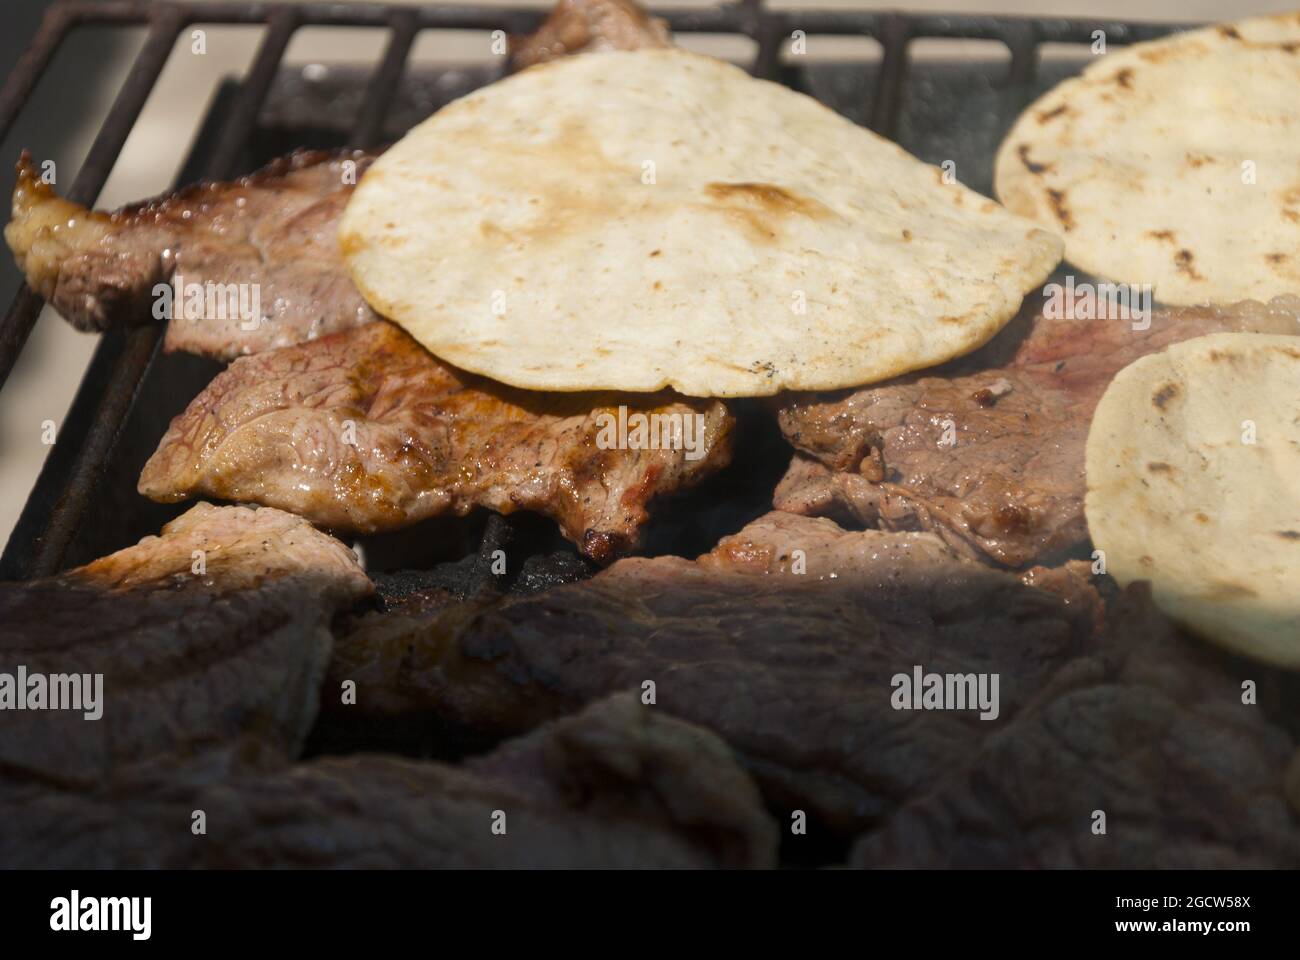 Beef grill with corn tortillas Stock Photo